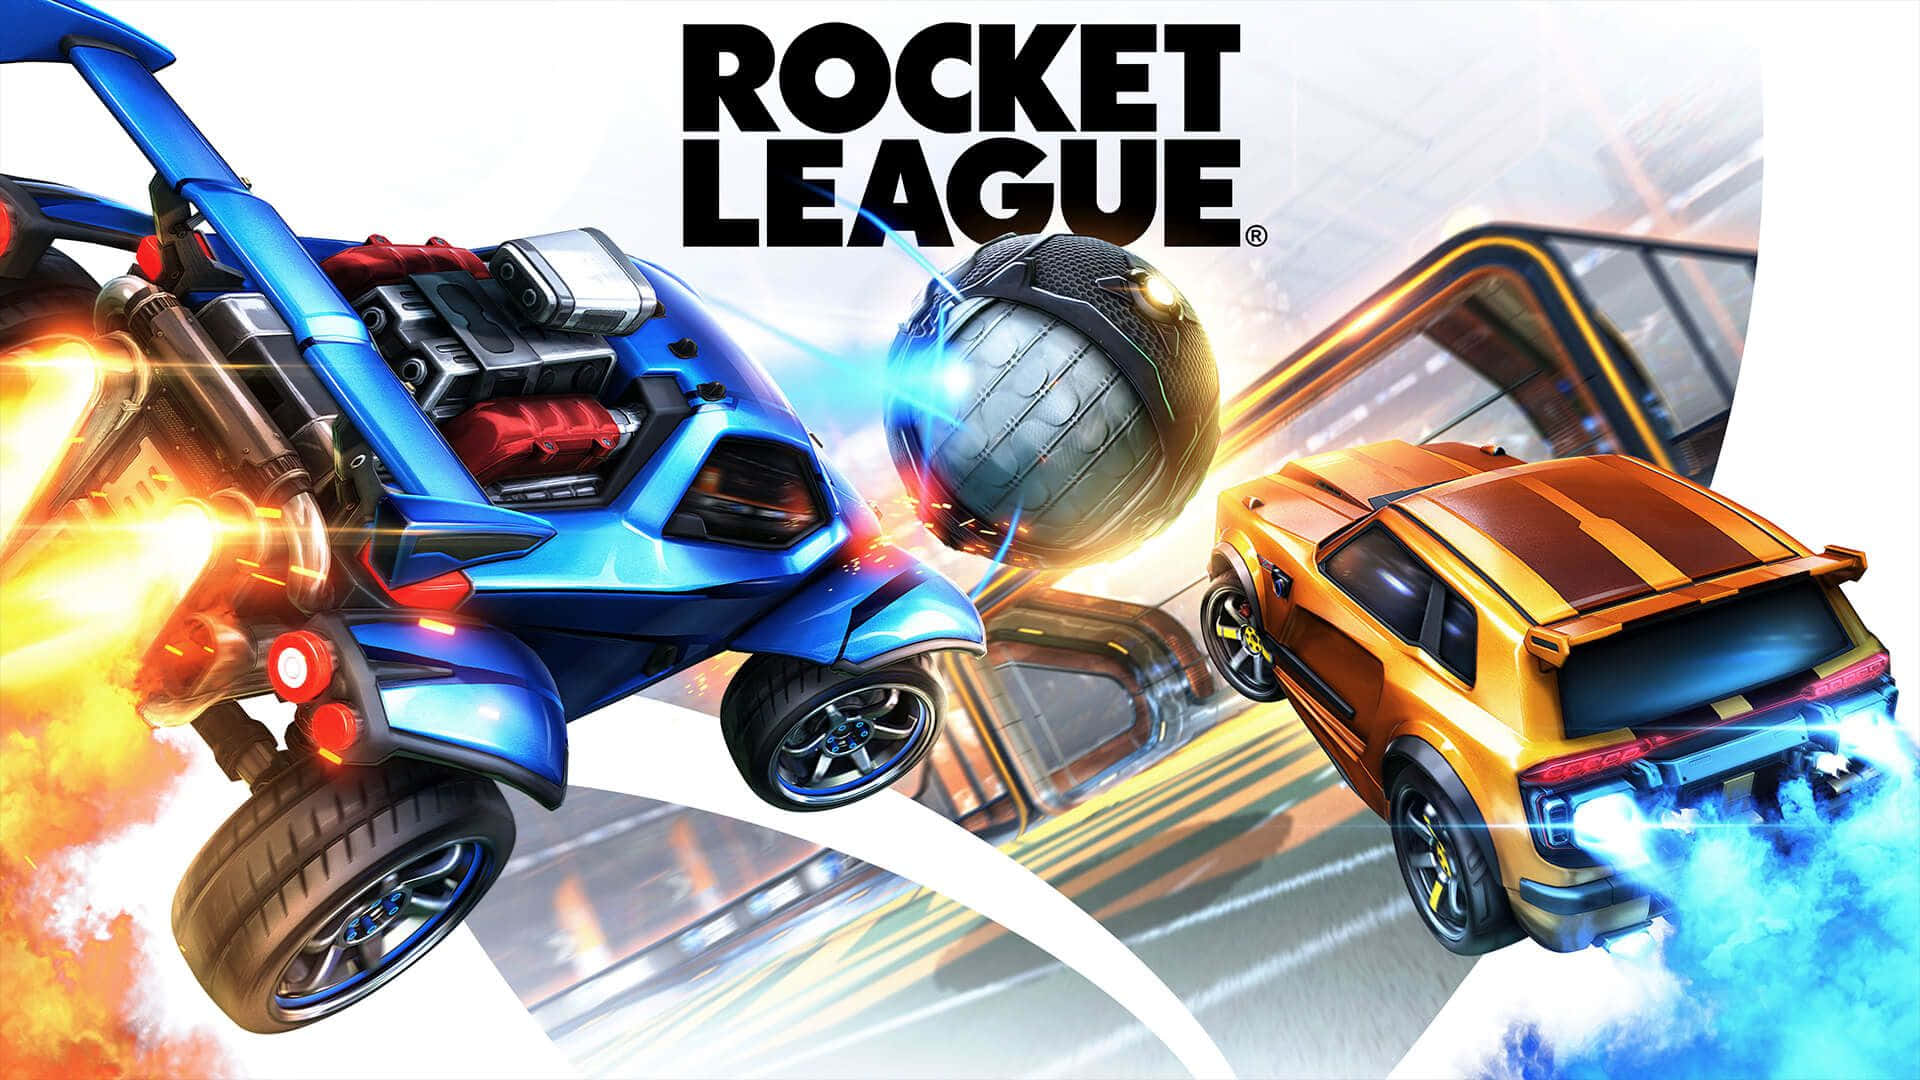 Rocket League - A Photo-Realistic Fusion of Racing and Soccer